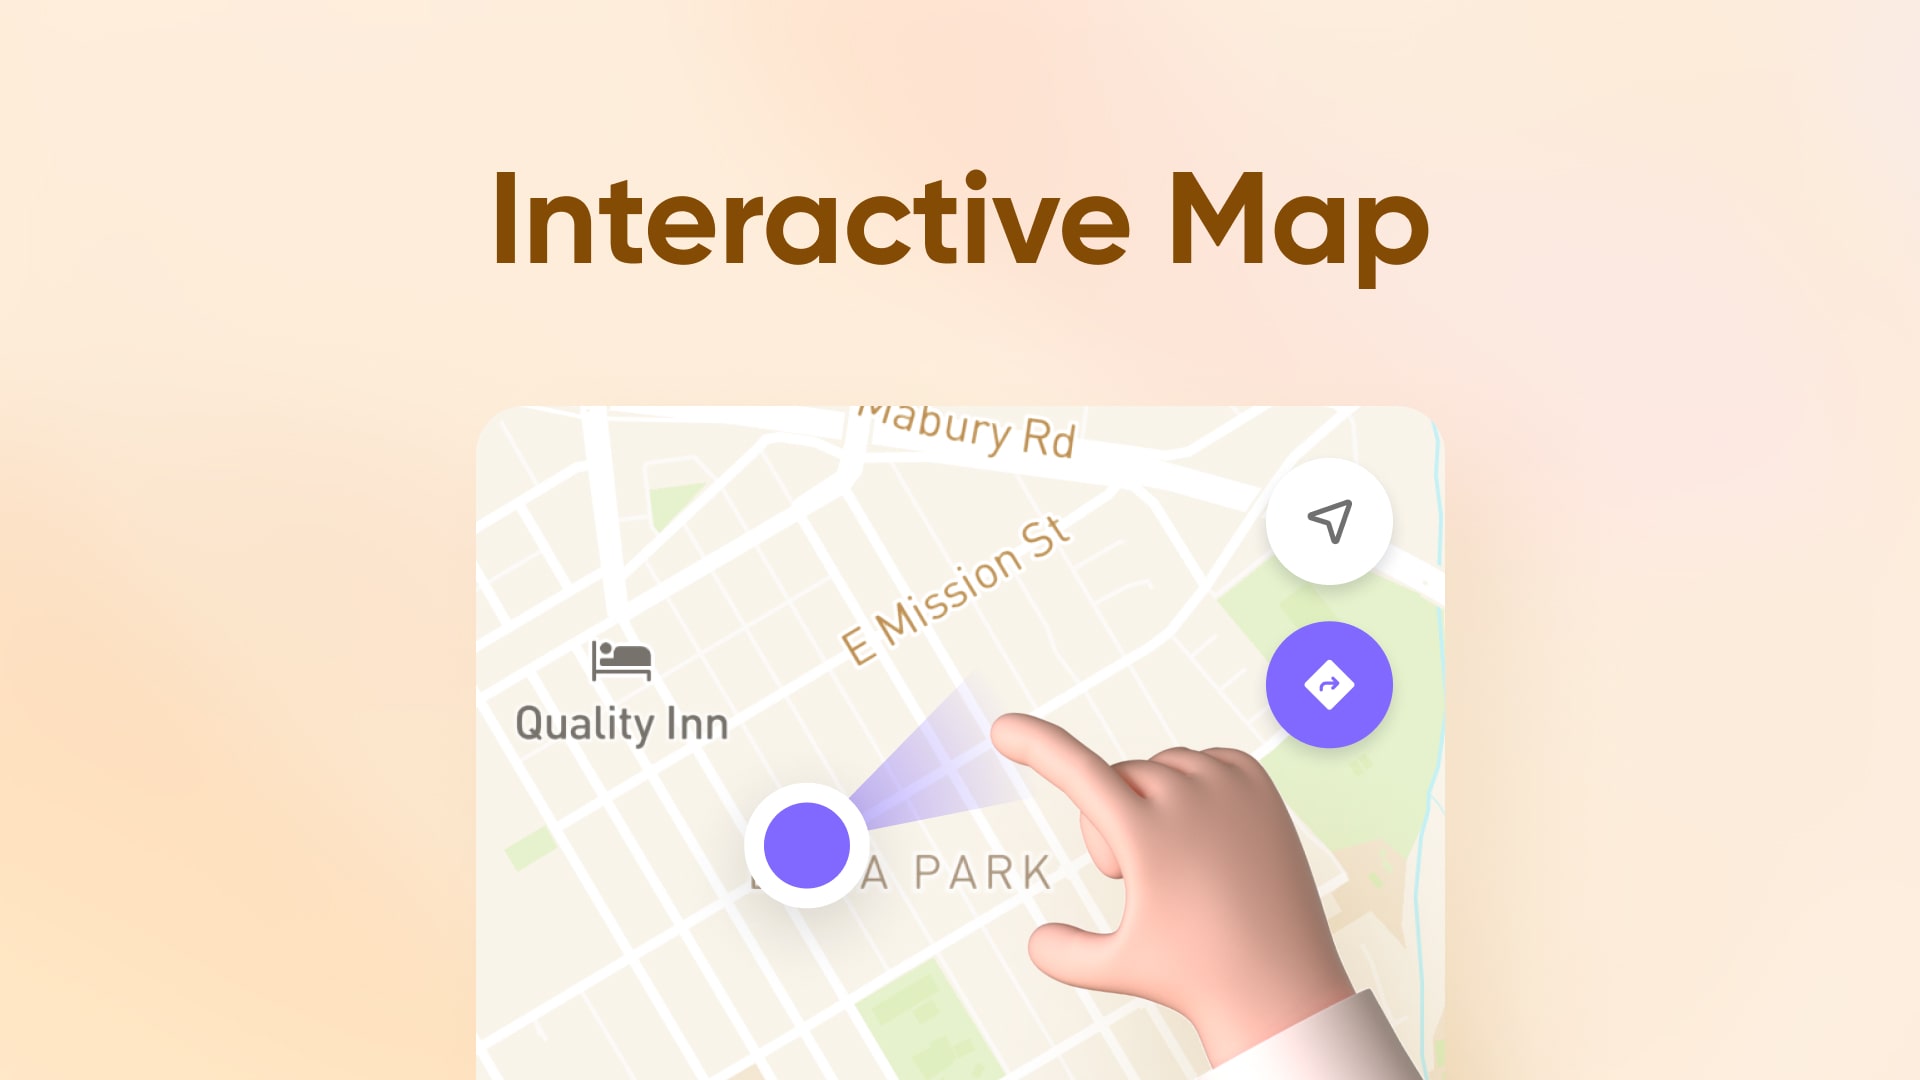 Multi touch interactive map experience thumbnail